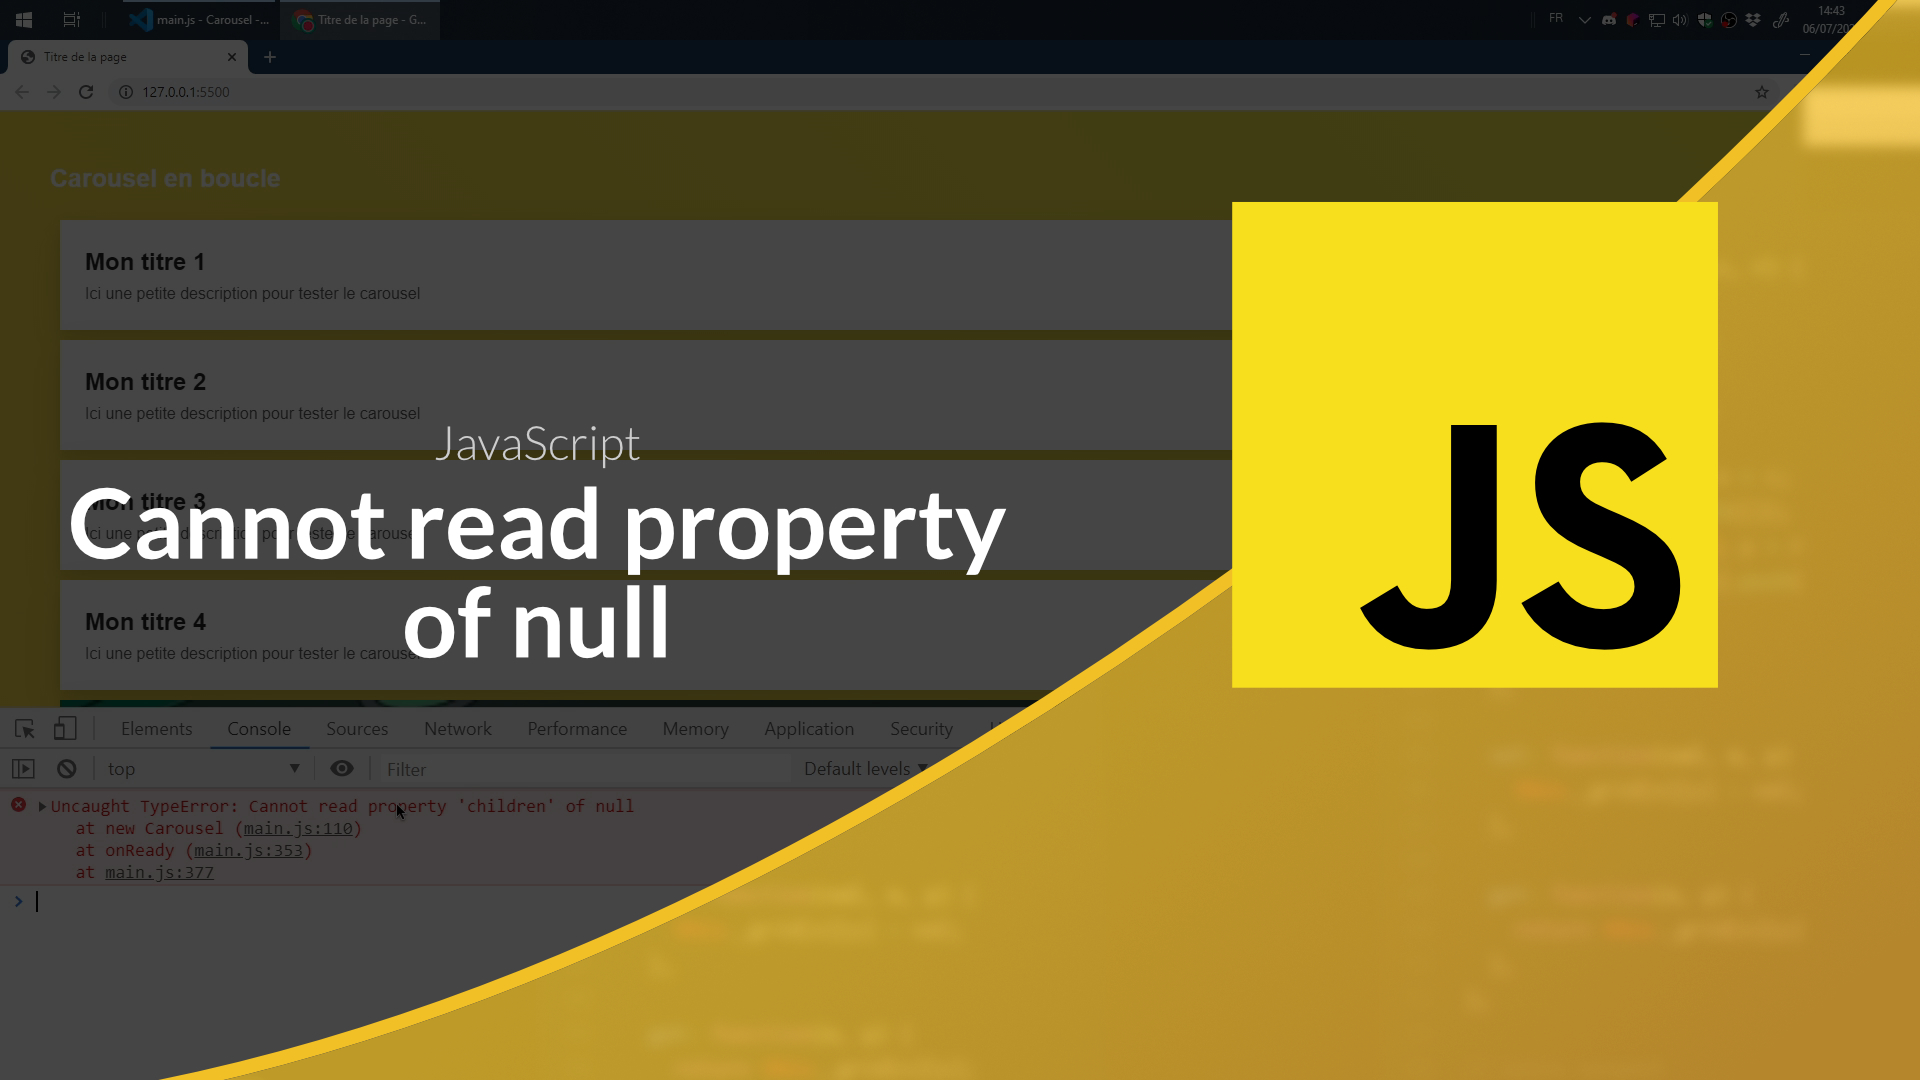 REGENERATORRUNTIME is not defined. Cannot read properties of null reading ADDEVENTLISTENER. Cant read. Null picture. Cannot set properties of null